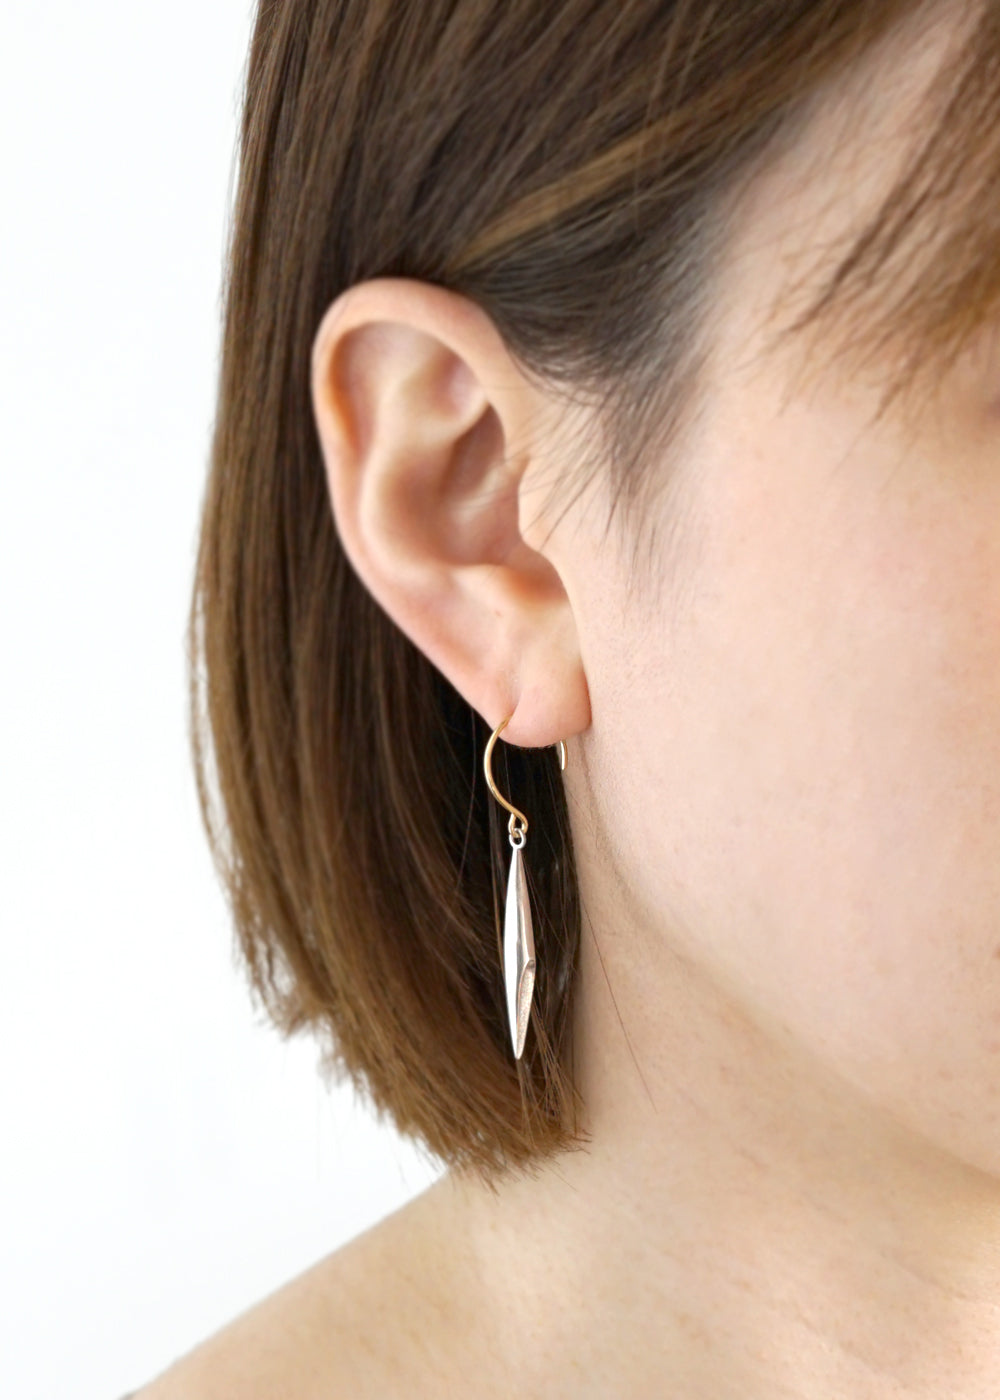 〈RECOLLECTION〉1:3 LONG earring ピアス / イヤリング